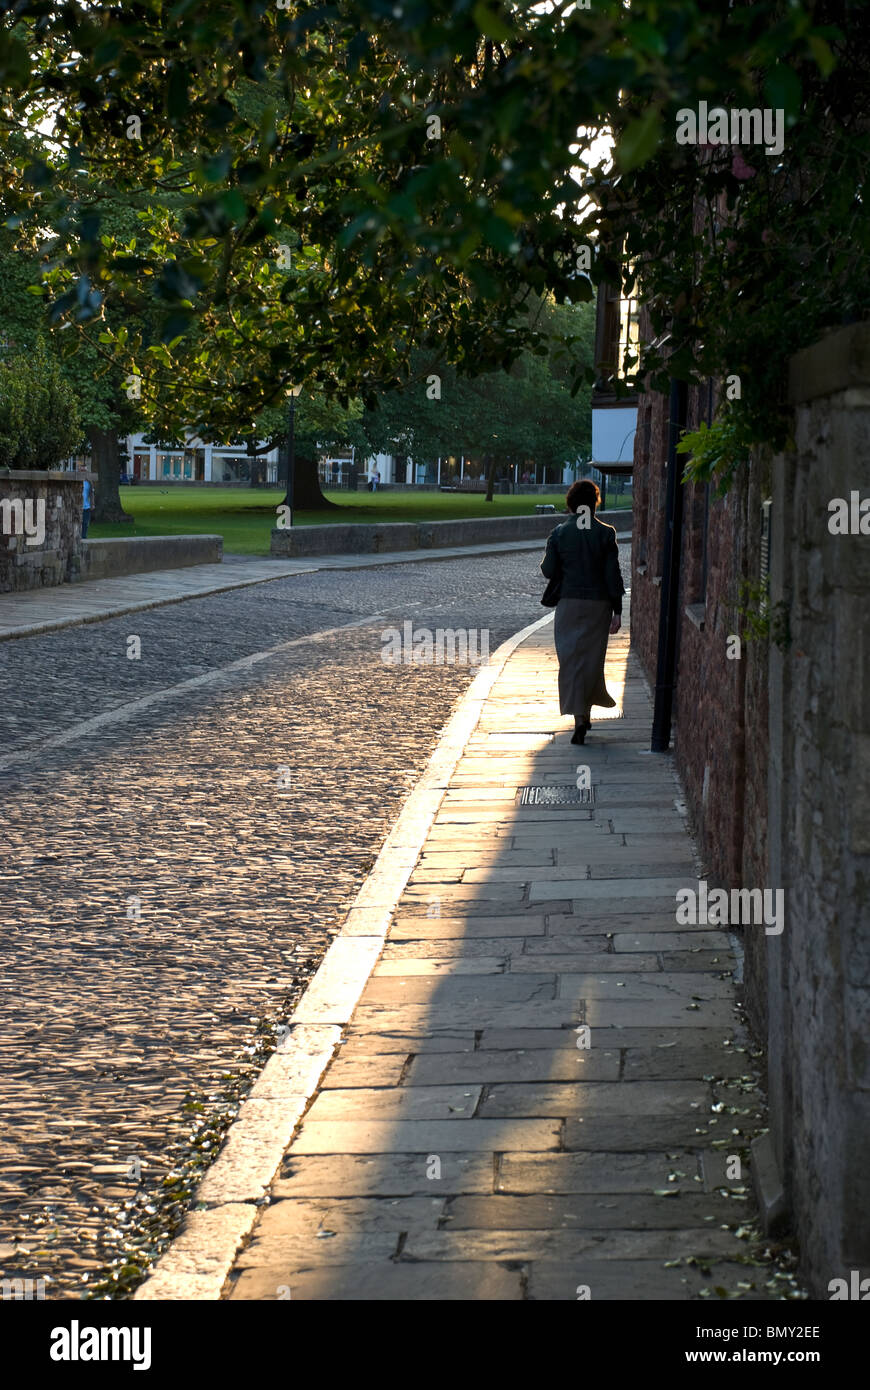 evening sunlight on stone pavement exeter cathedral close Stock Photo